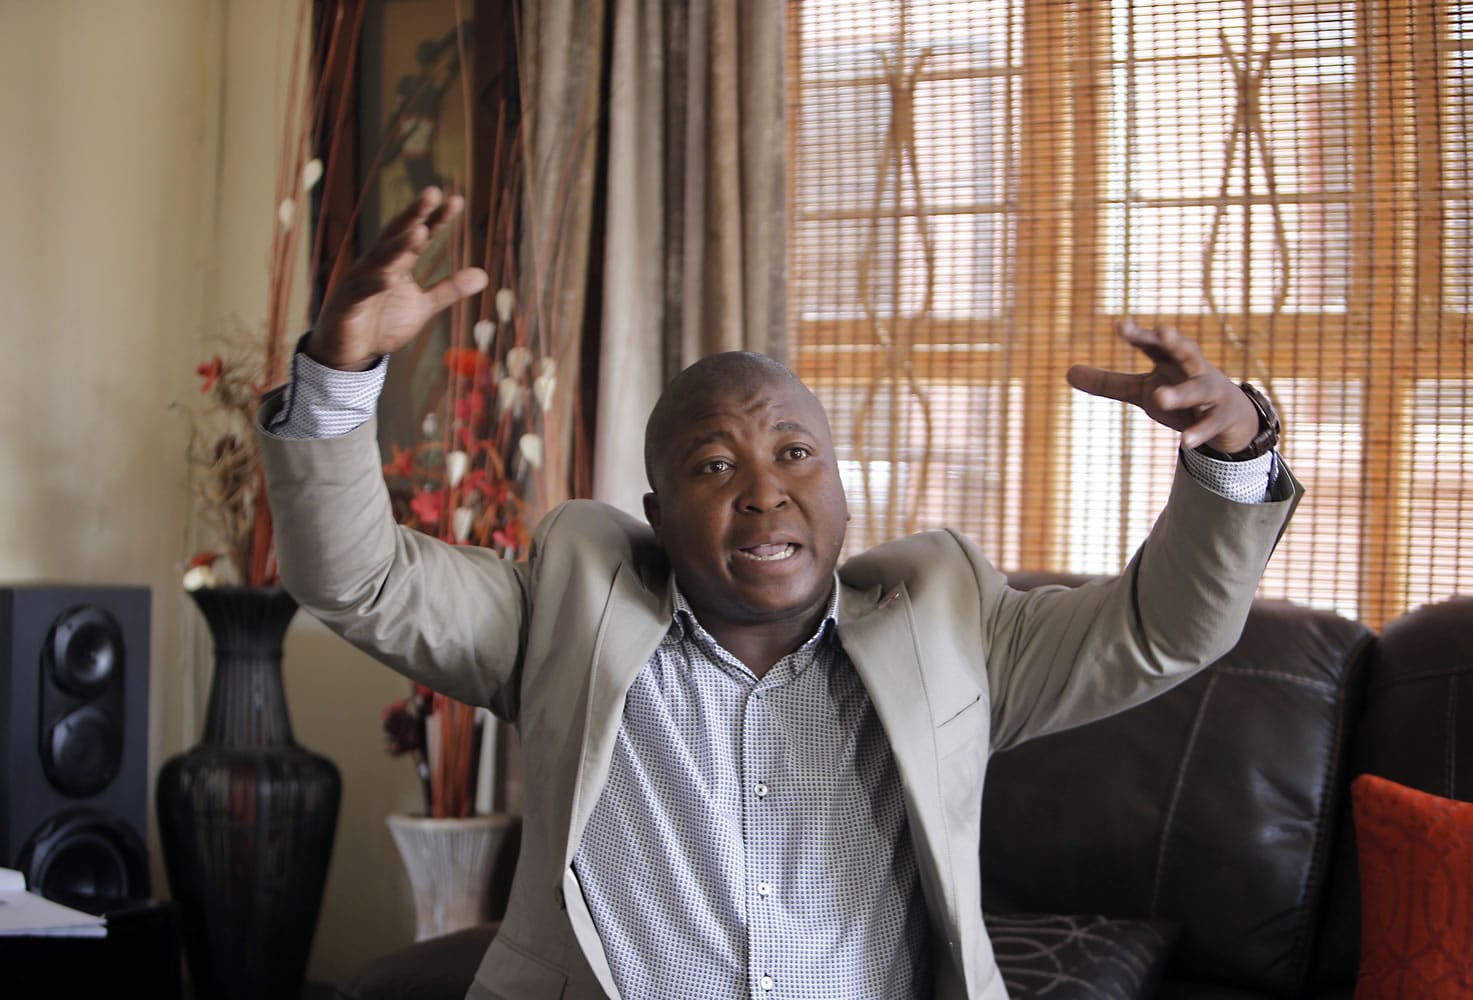 Thamsanqa Jantjie gesticulates at his home during an interview with the Associated Press in Johannesburg, South Africa, on Thursday.